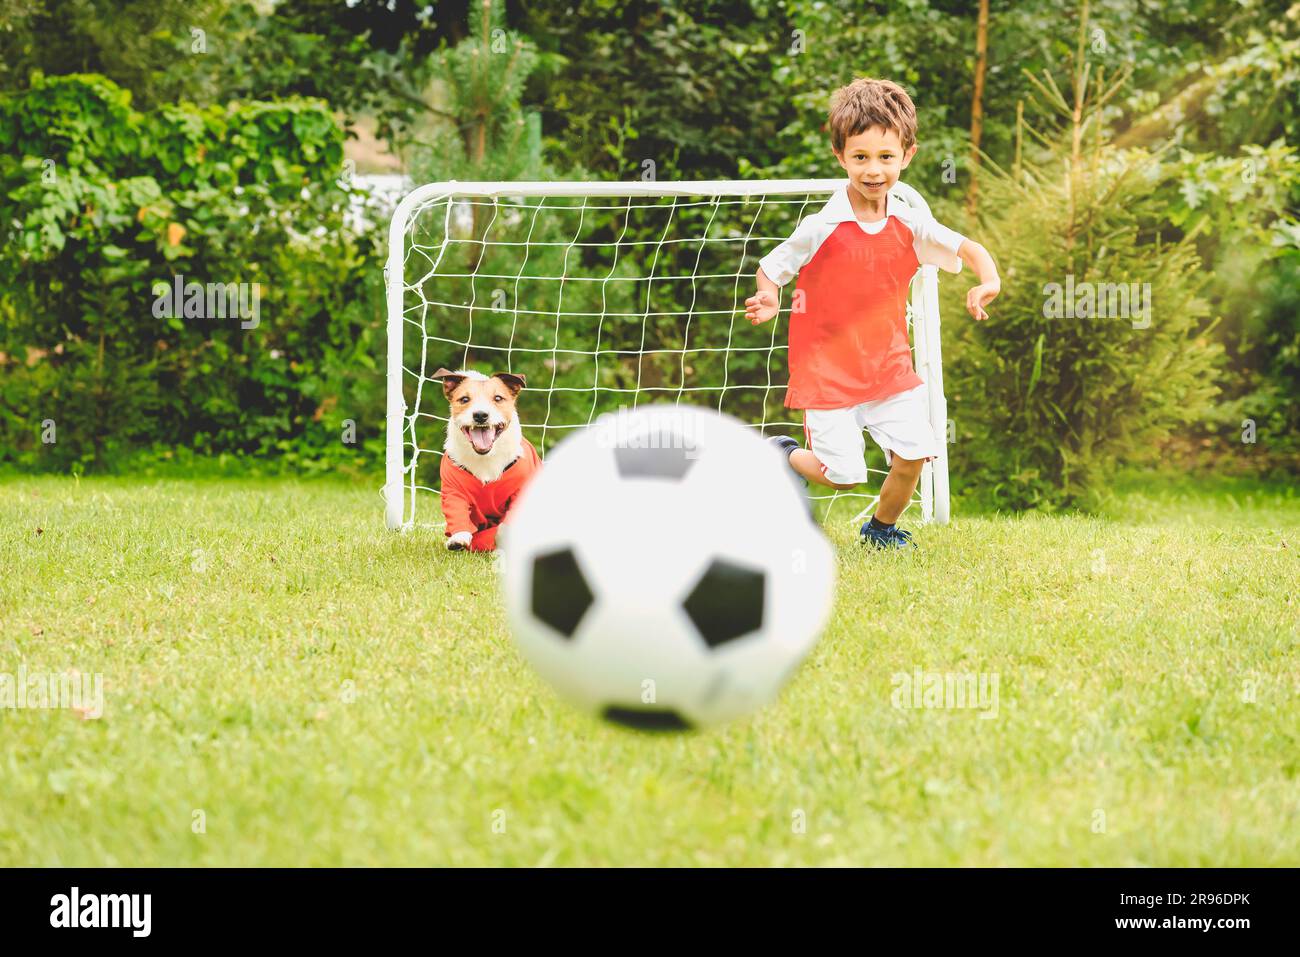 Happy kid in soccer kit playing football with family pet dog at garden lawn on summer day Stock Photo